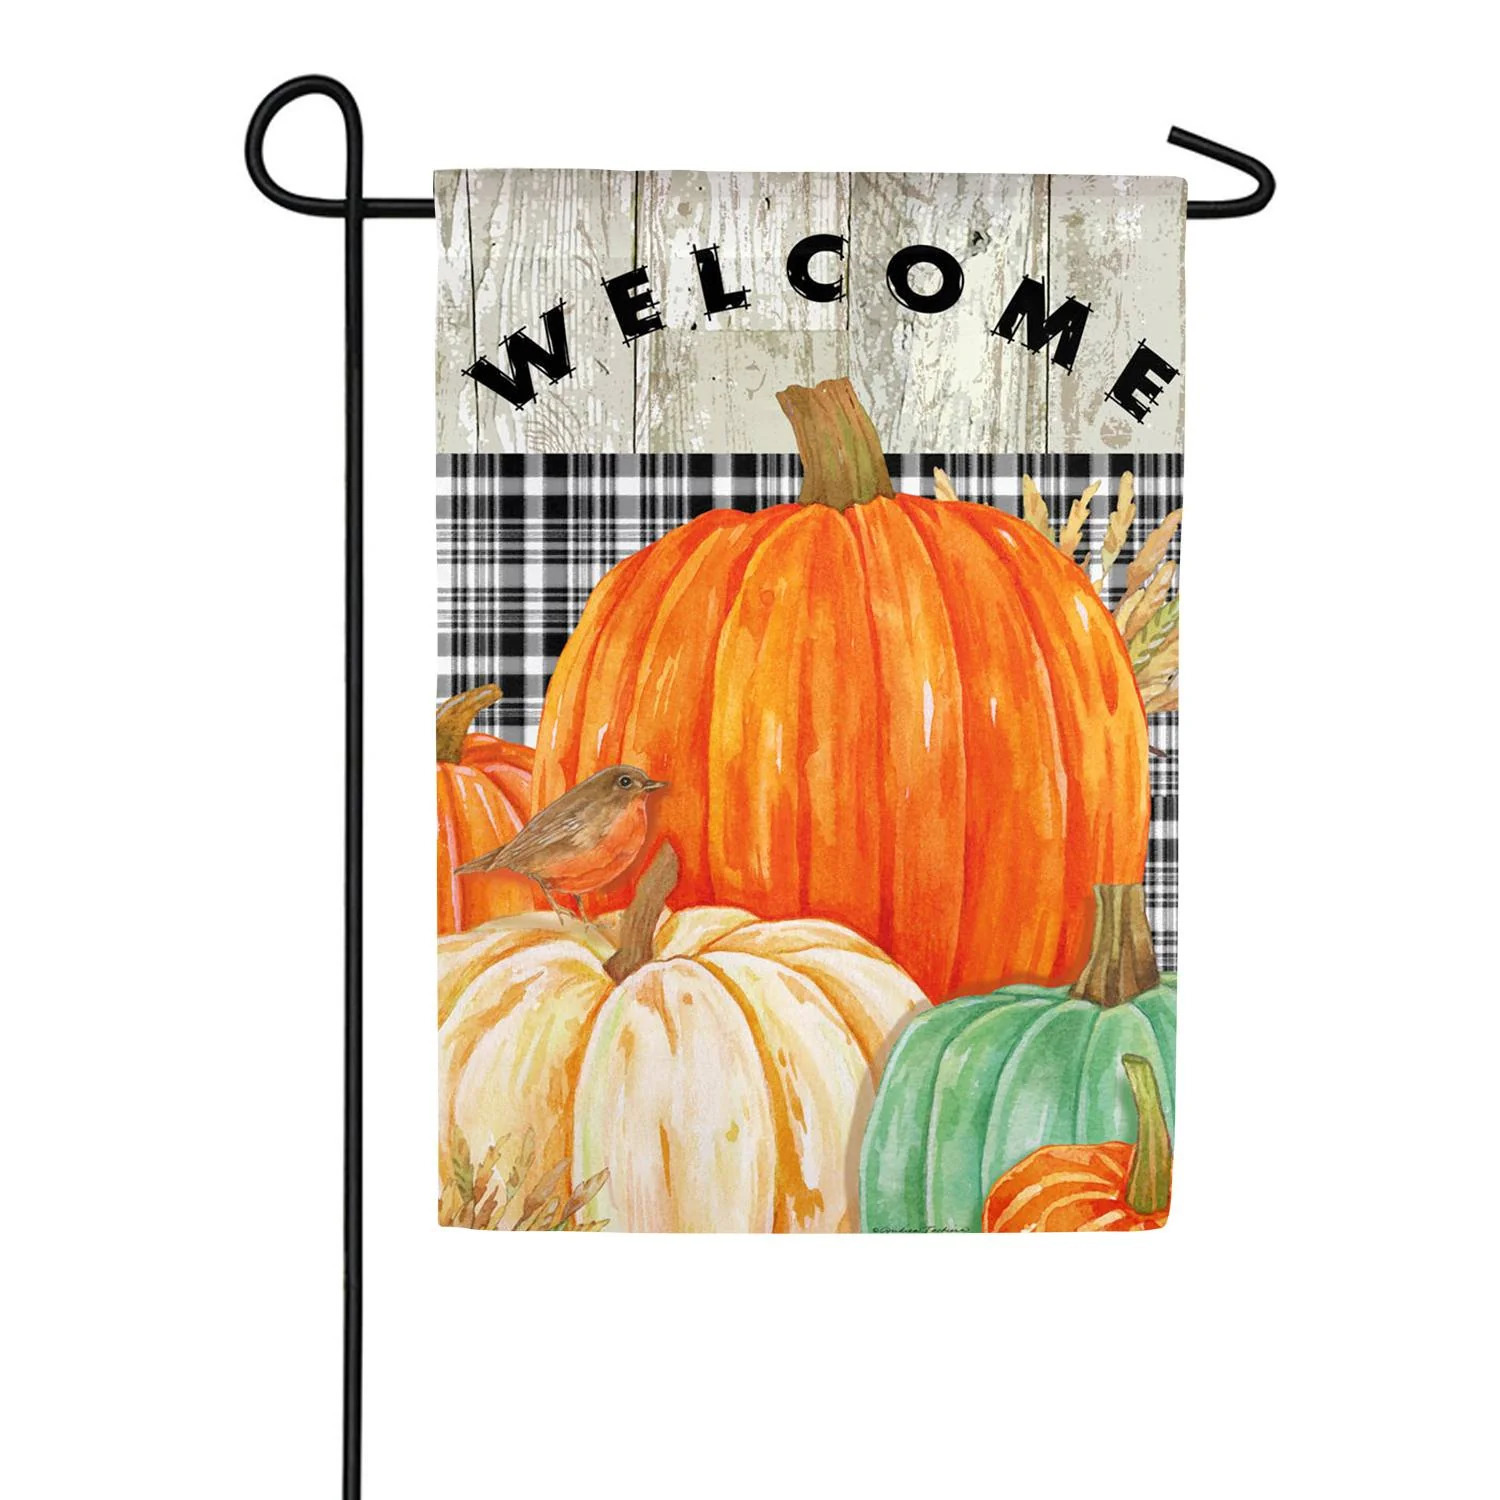 Primary image for Fresh Pumpkins Garden Suede Flag- 2 Sided Message, 12.5" x 18"